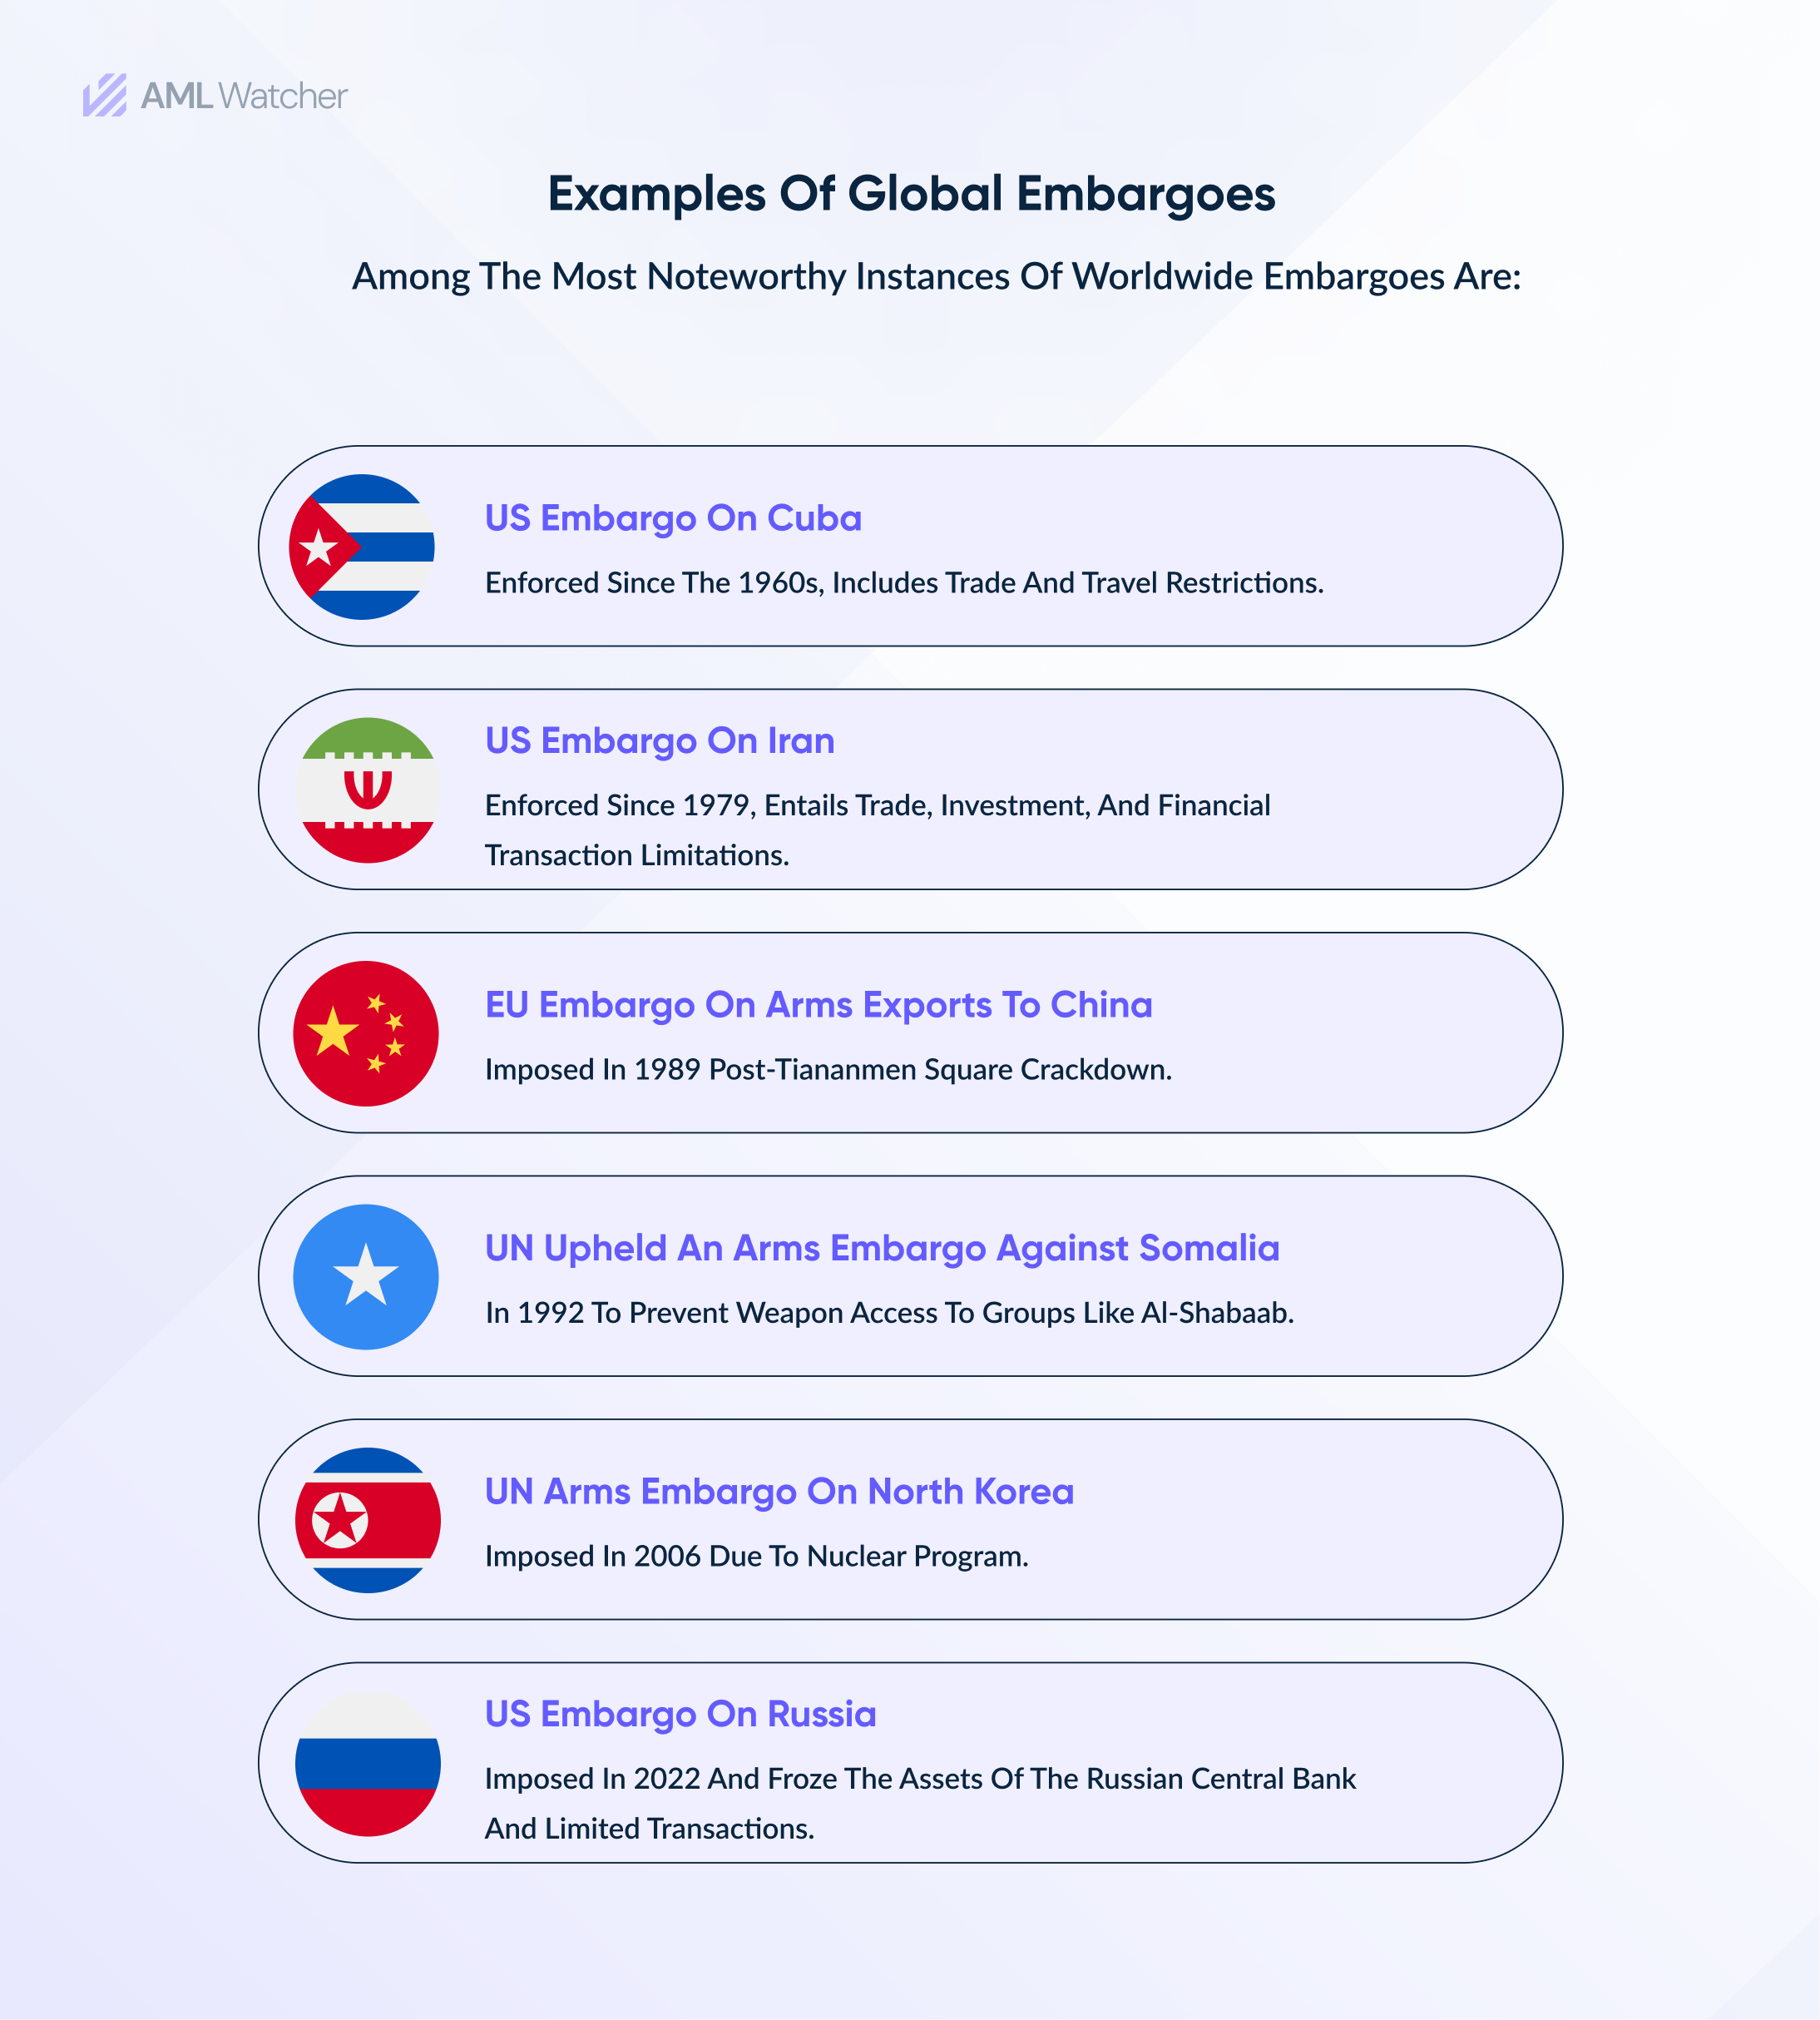 The image shows the latest examples of imposed international embargoes.